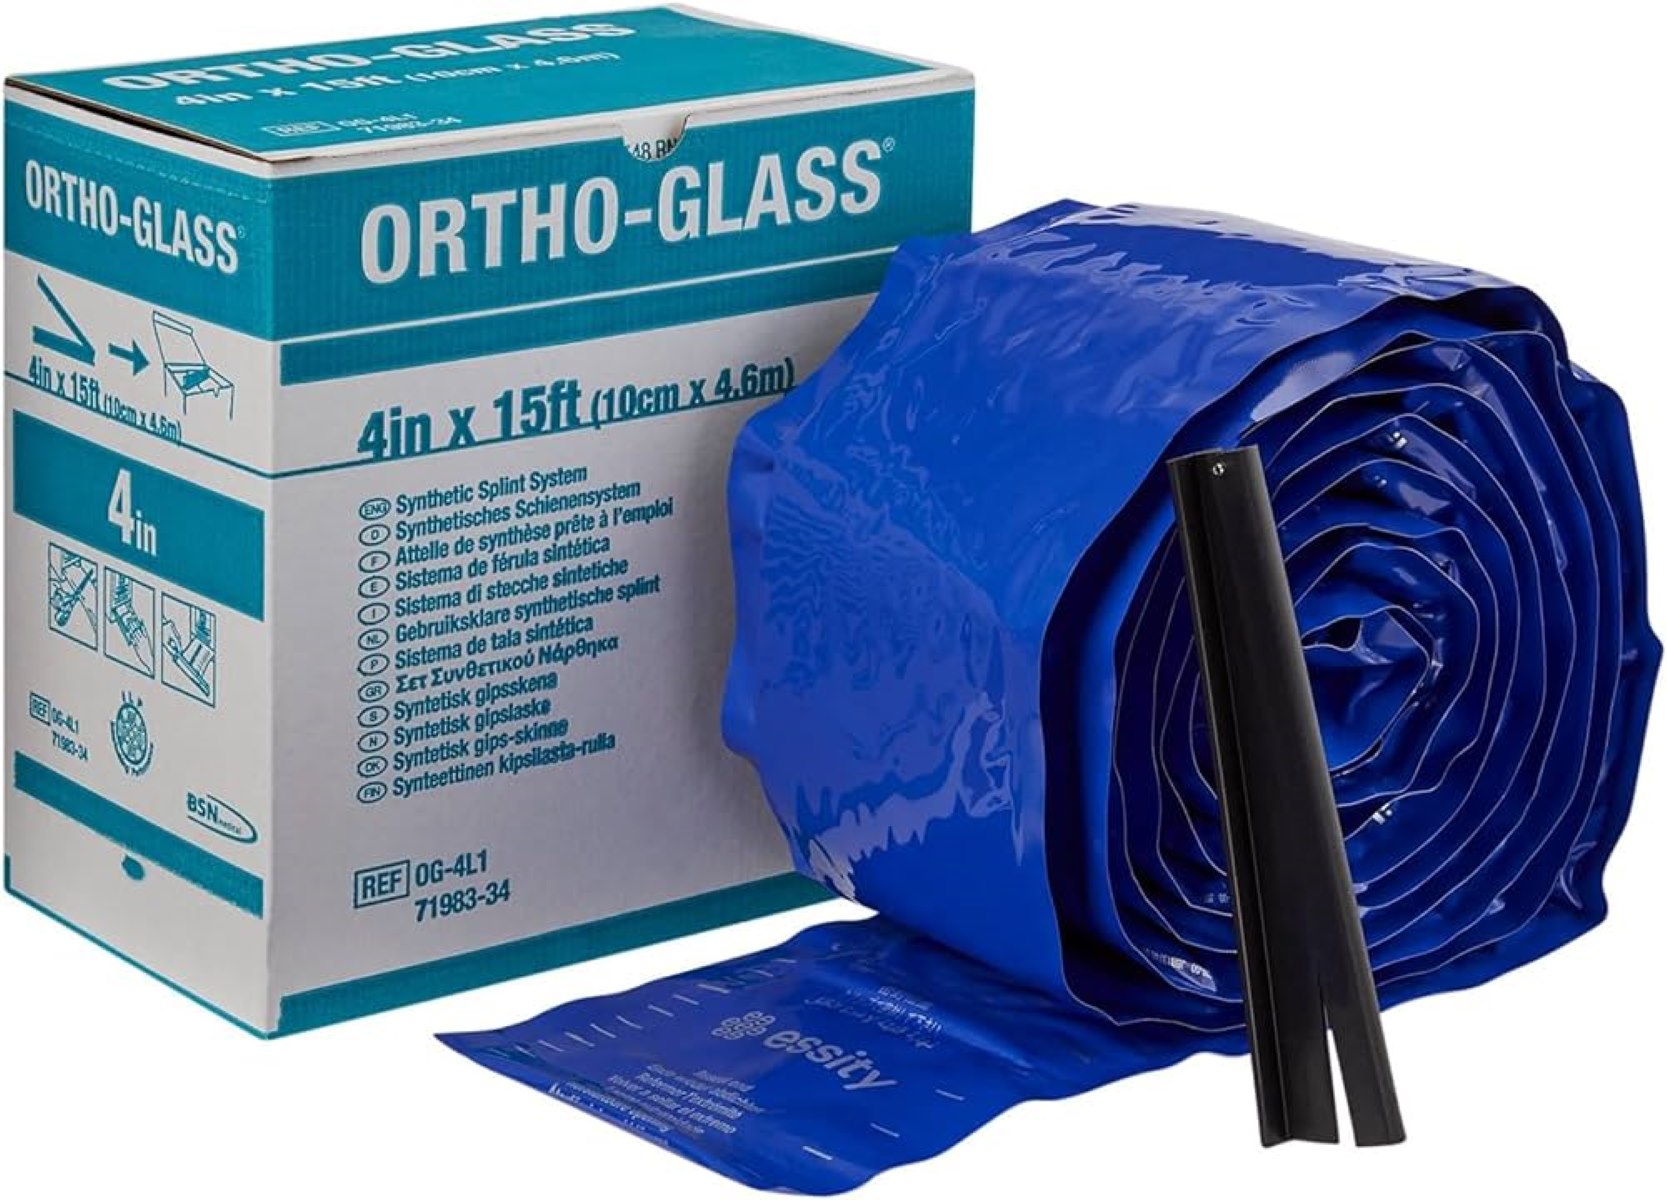 How To Use Ortho Glass